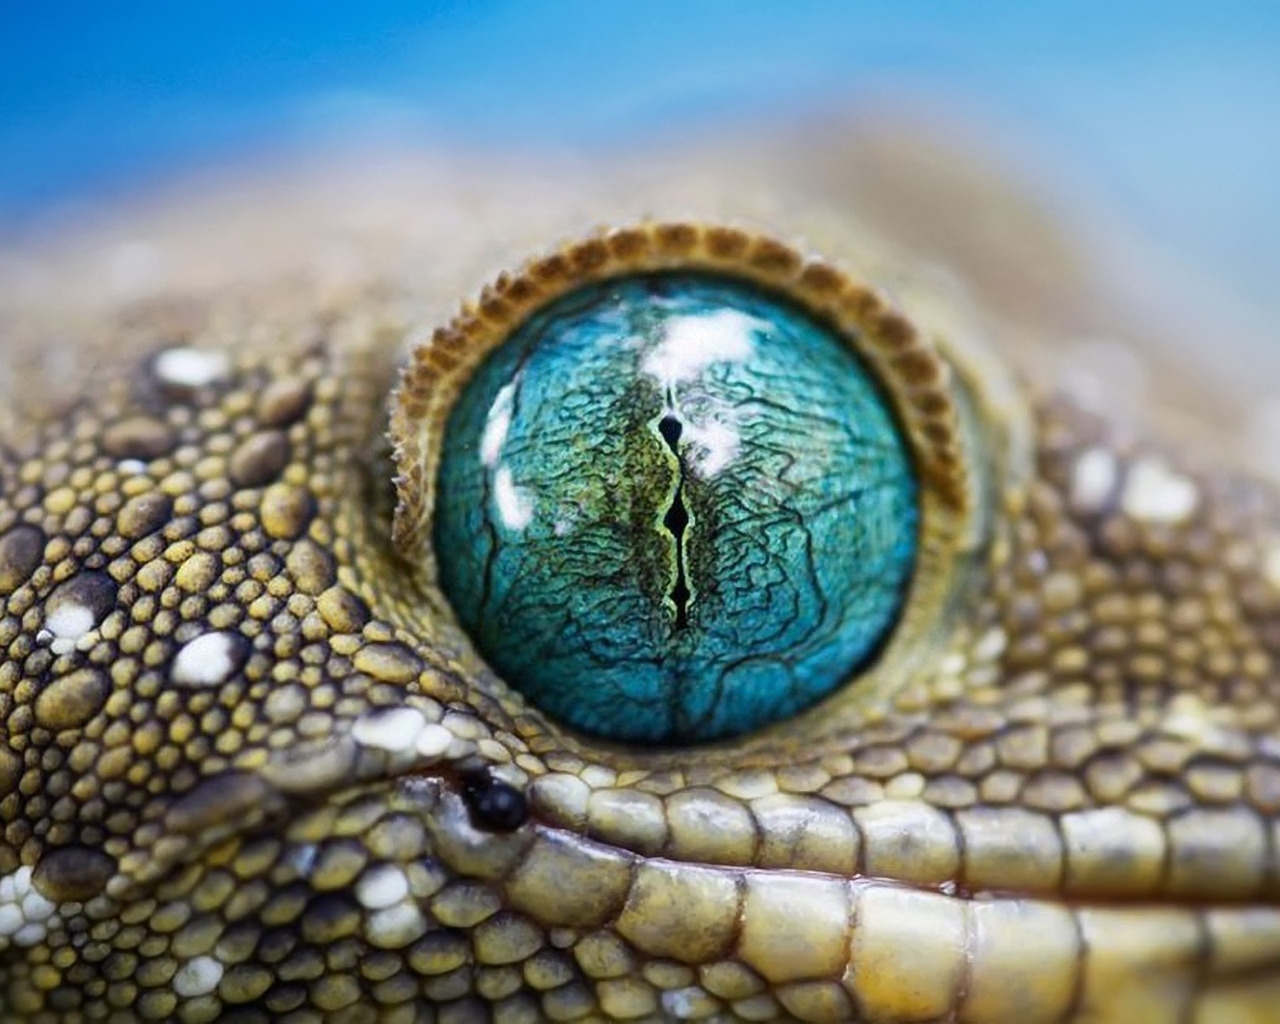 Blue Reptile Eye for 1280 x 1024 resolution